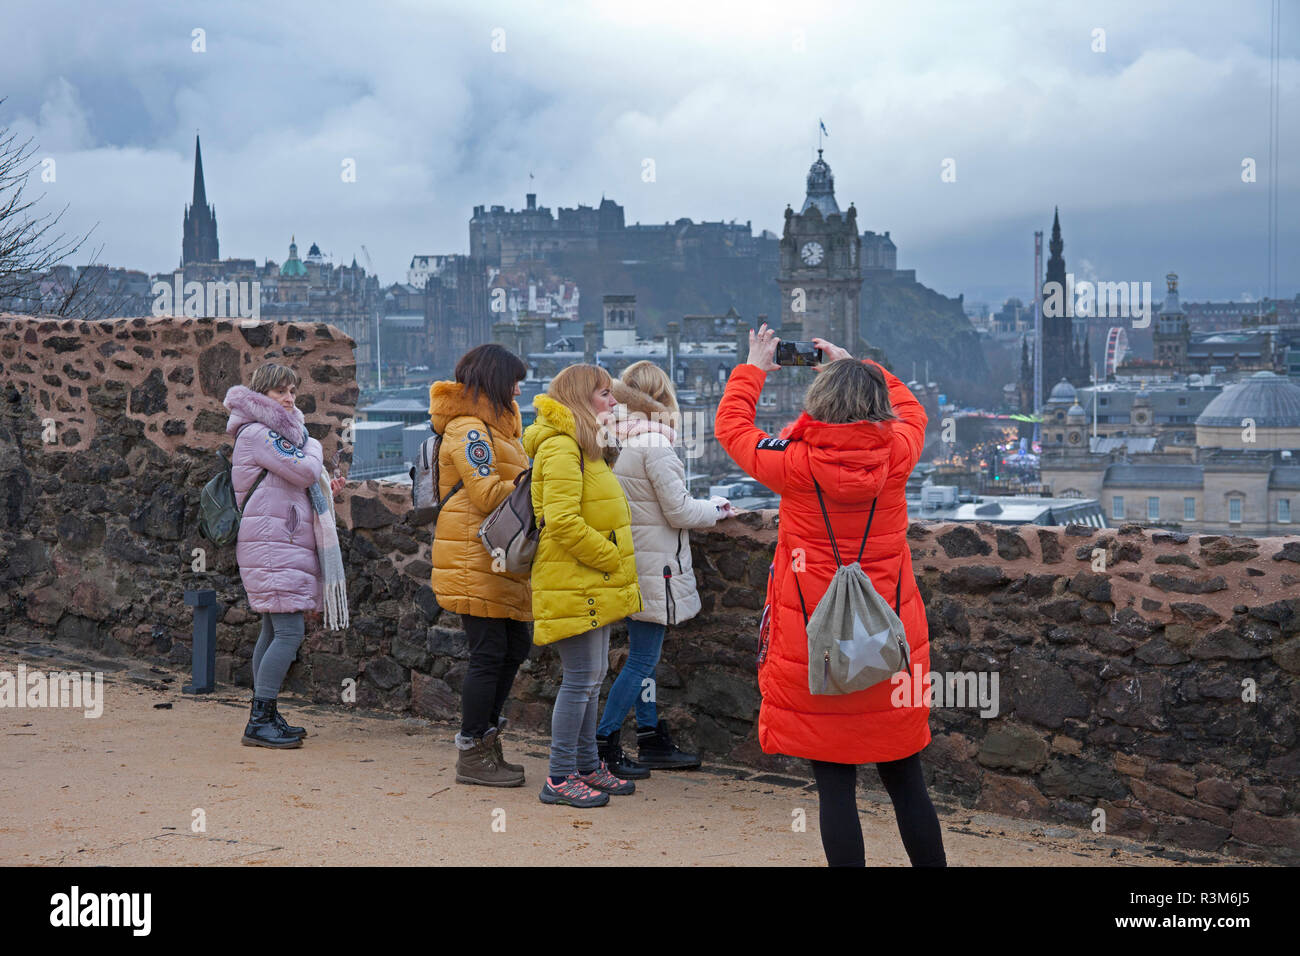 Edinburgh, Scotland, UK, 24 Nov. 2018. Weather, after a very wet week in the Scottish capital, Saturday began in a similar vein greeting these tourists and residents alike with early heavy rain and leaden skies. Stock Photo